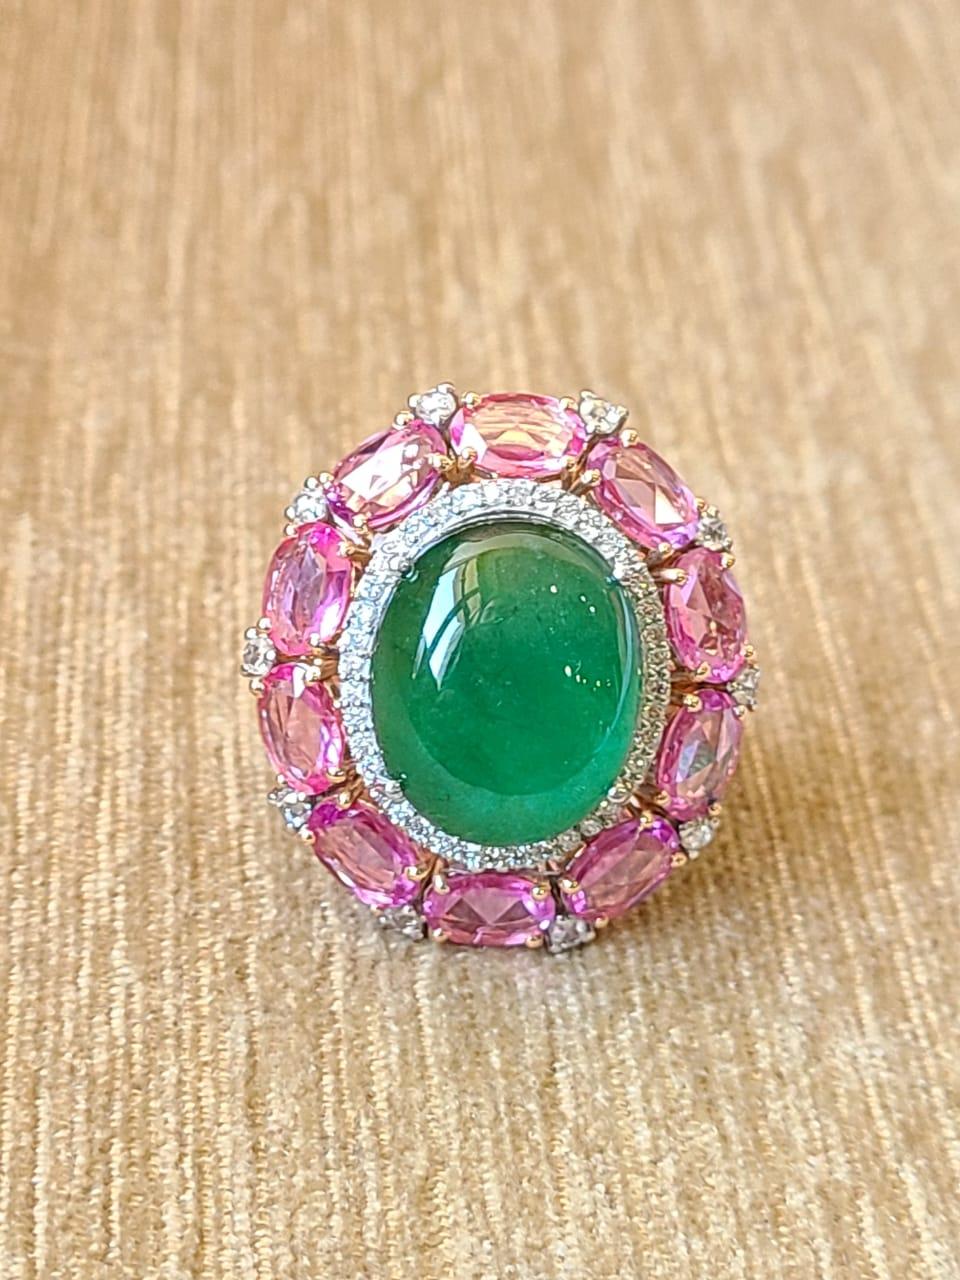 A very gorgeous and one of a kind, Emerald & Pink Sapphires Cocktail Ring set in 18K Gold & Diamonds. The weight of the Emerald Cabochon is 13.18 carats. The Emerald is of Zambian origin and is completely natural, without any treatment. The weight